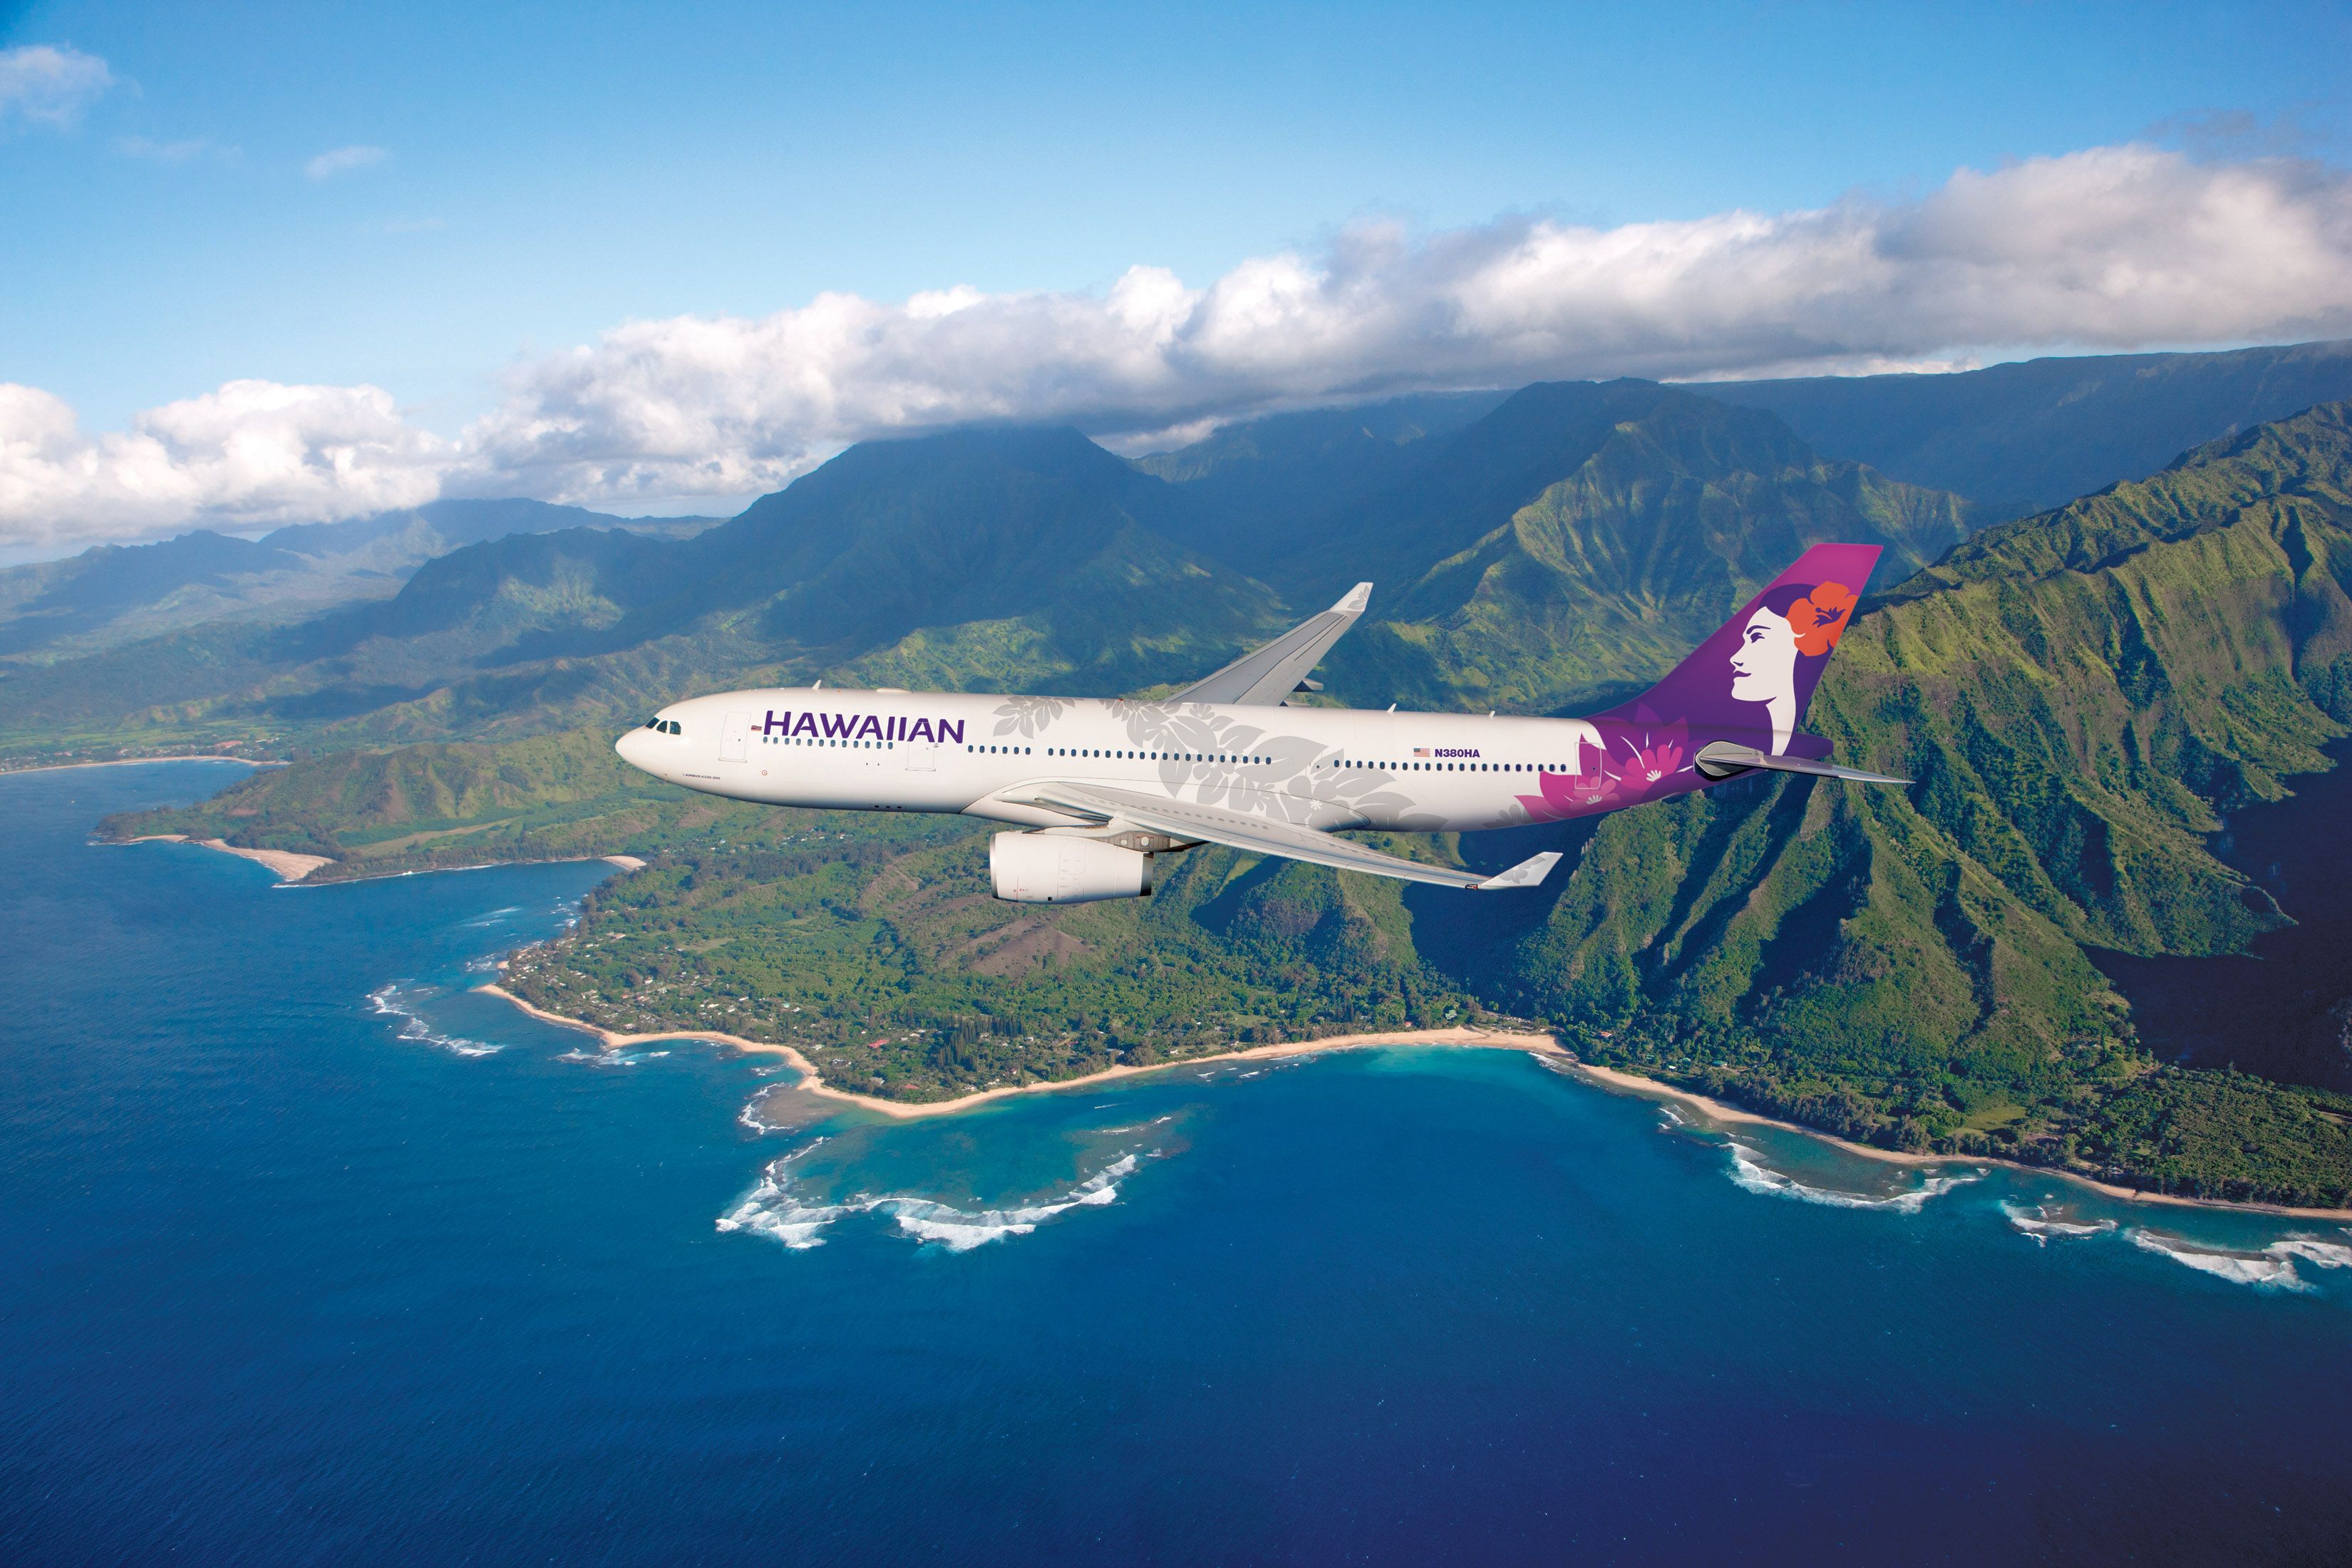 A Hawaian Airlines Airbus A330 flying along the coast.